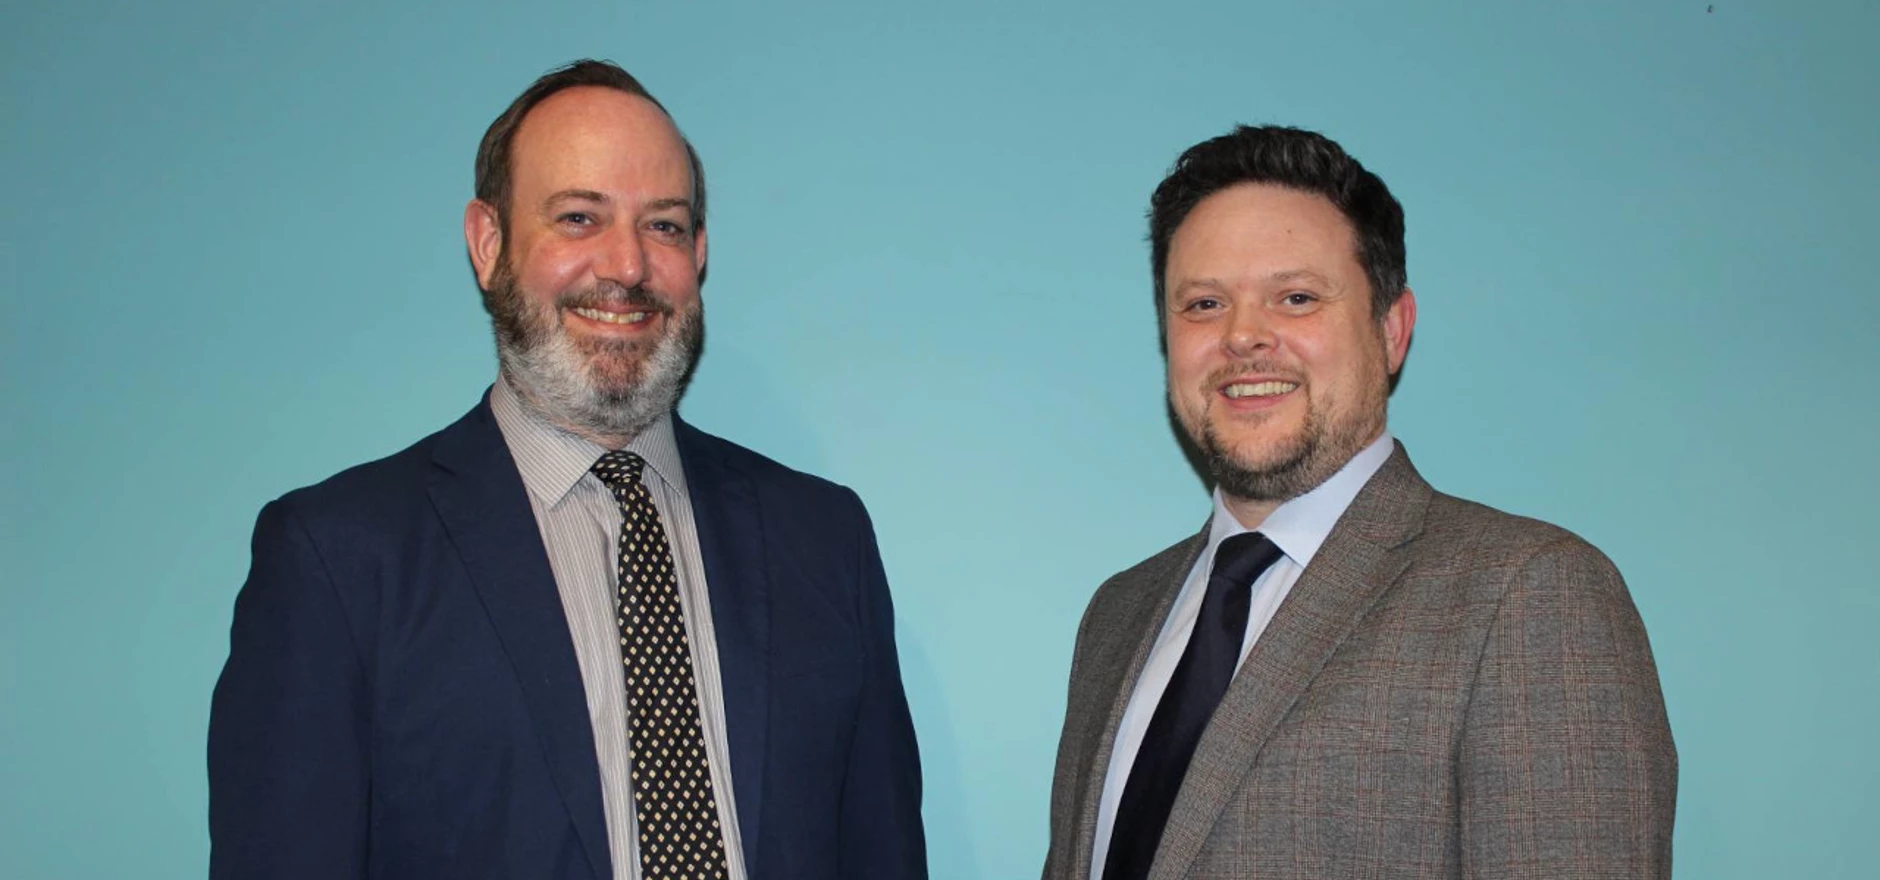 Stephen Deakin, Chief Executive at BCRS Business Loans, left, with Andrew Hustwit, Head of Business Development.jpg